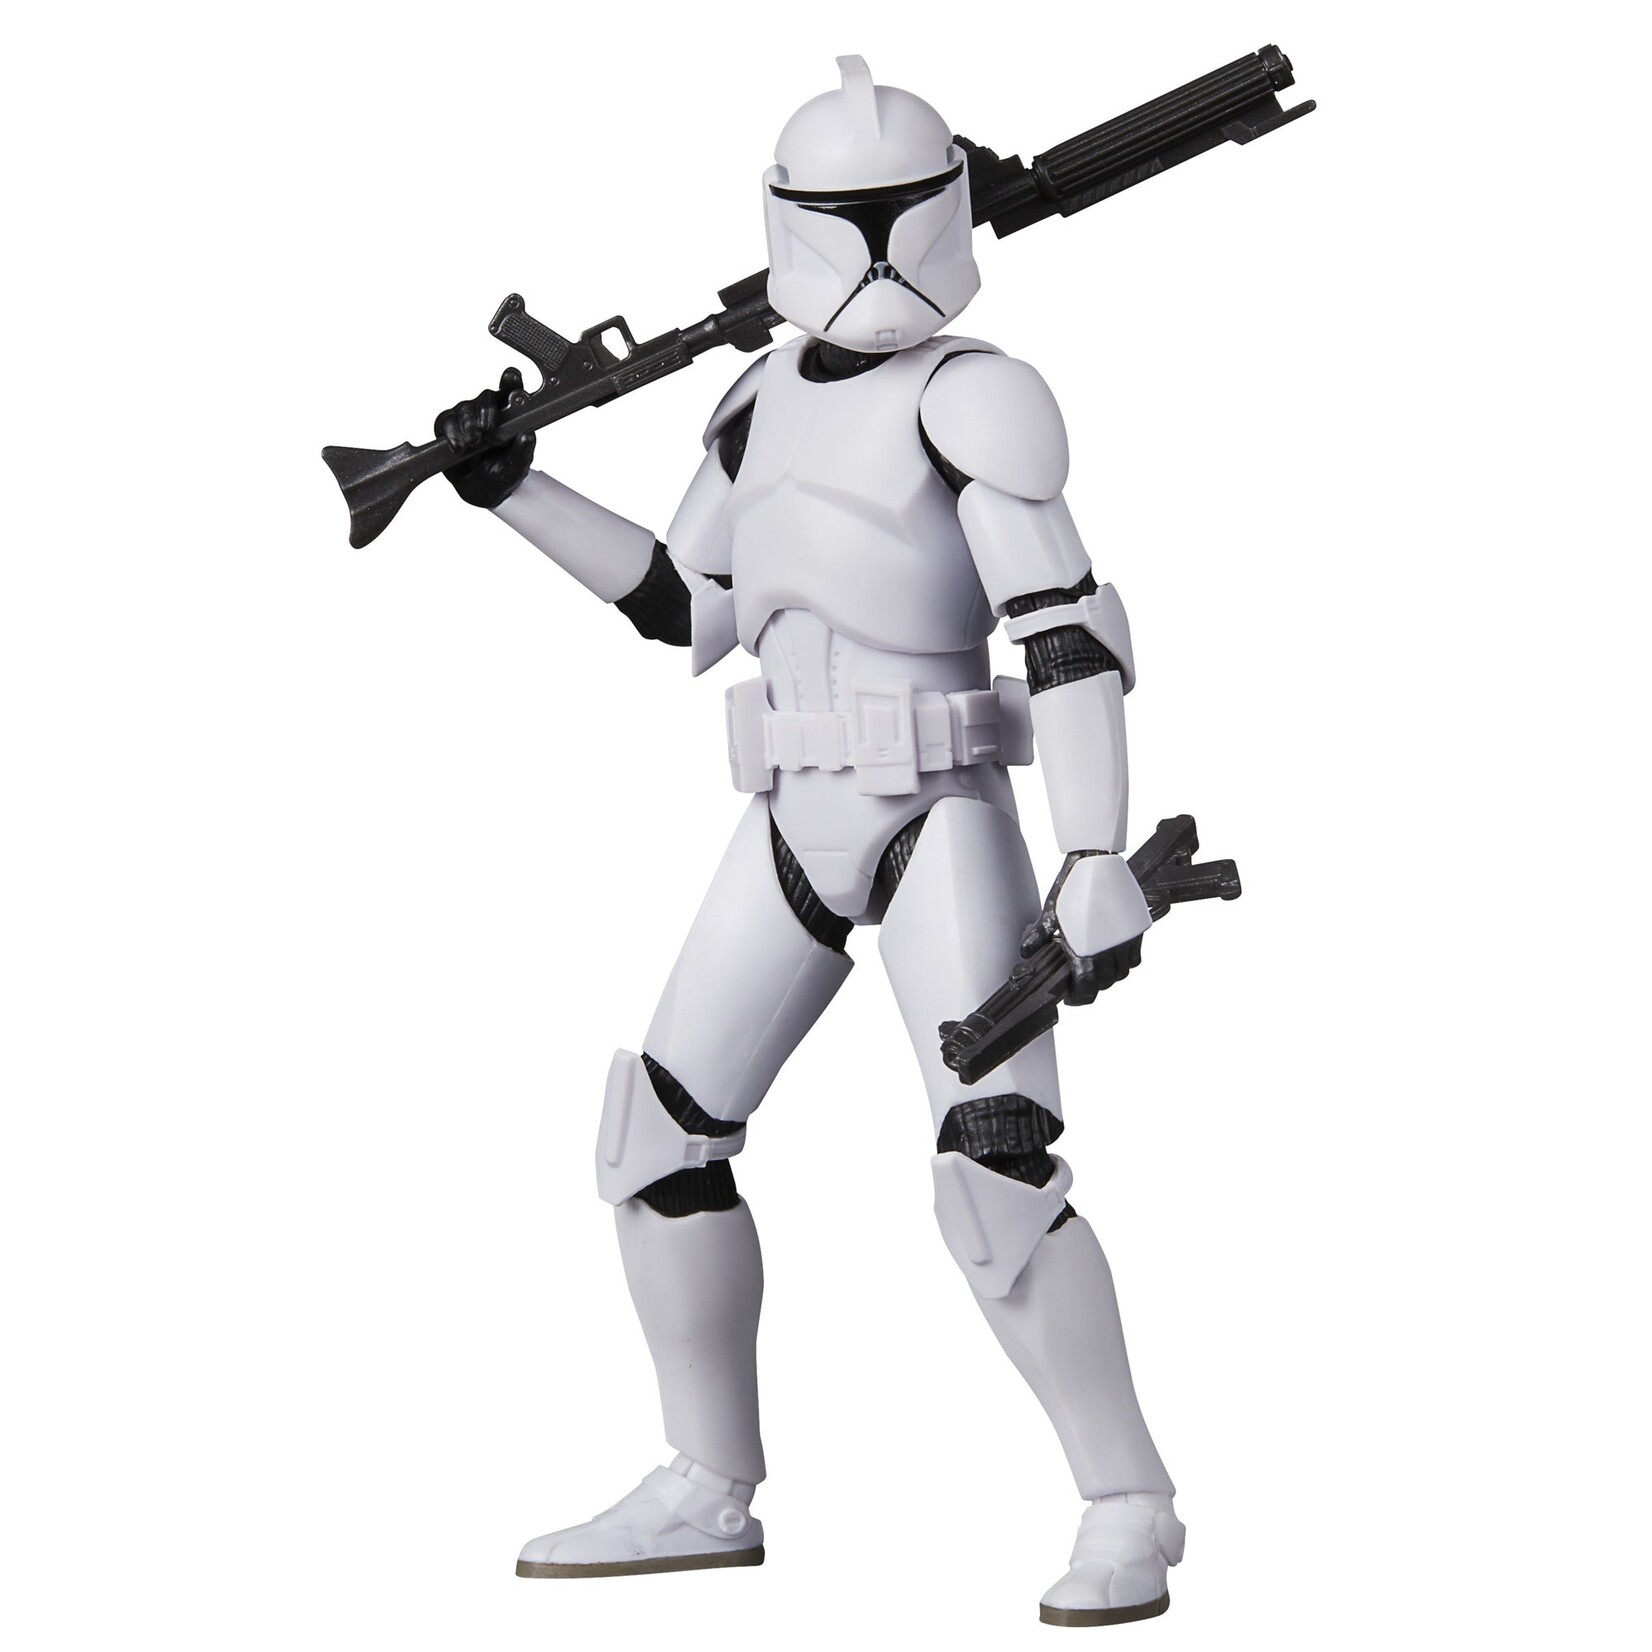 Hasbro Hasbro Star Wars Attack Of The Clones The Black Series Action Figure Phase I Clone Trooper 15 cm